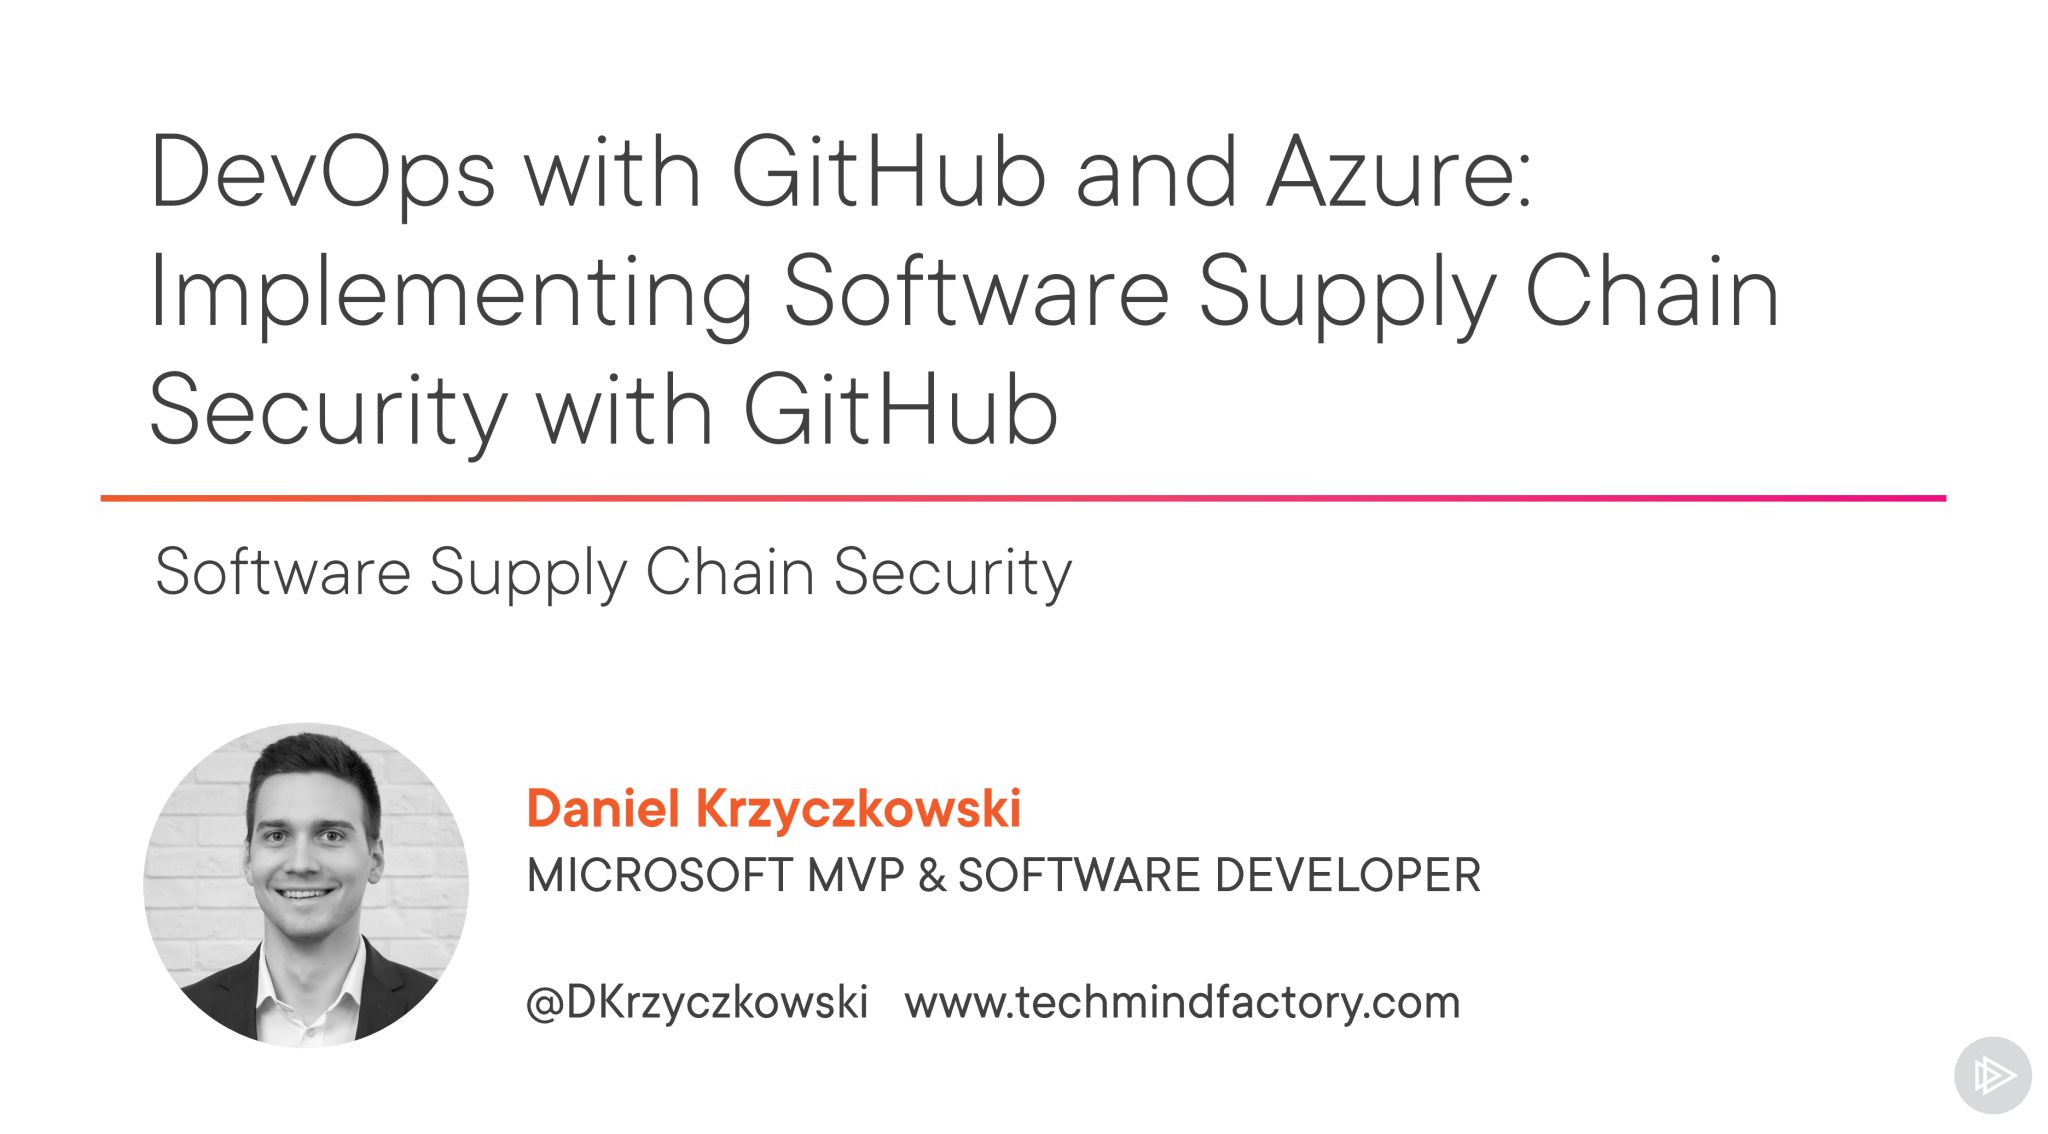 DevOps with GitHub and Azure: Implementing Software Supply Chain Security with GitHub